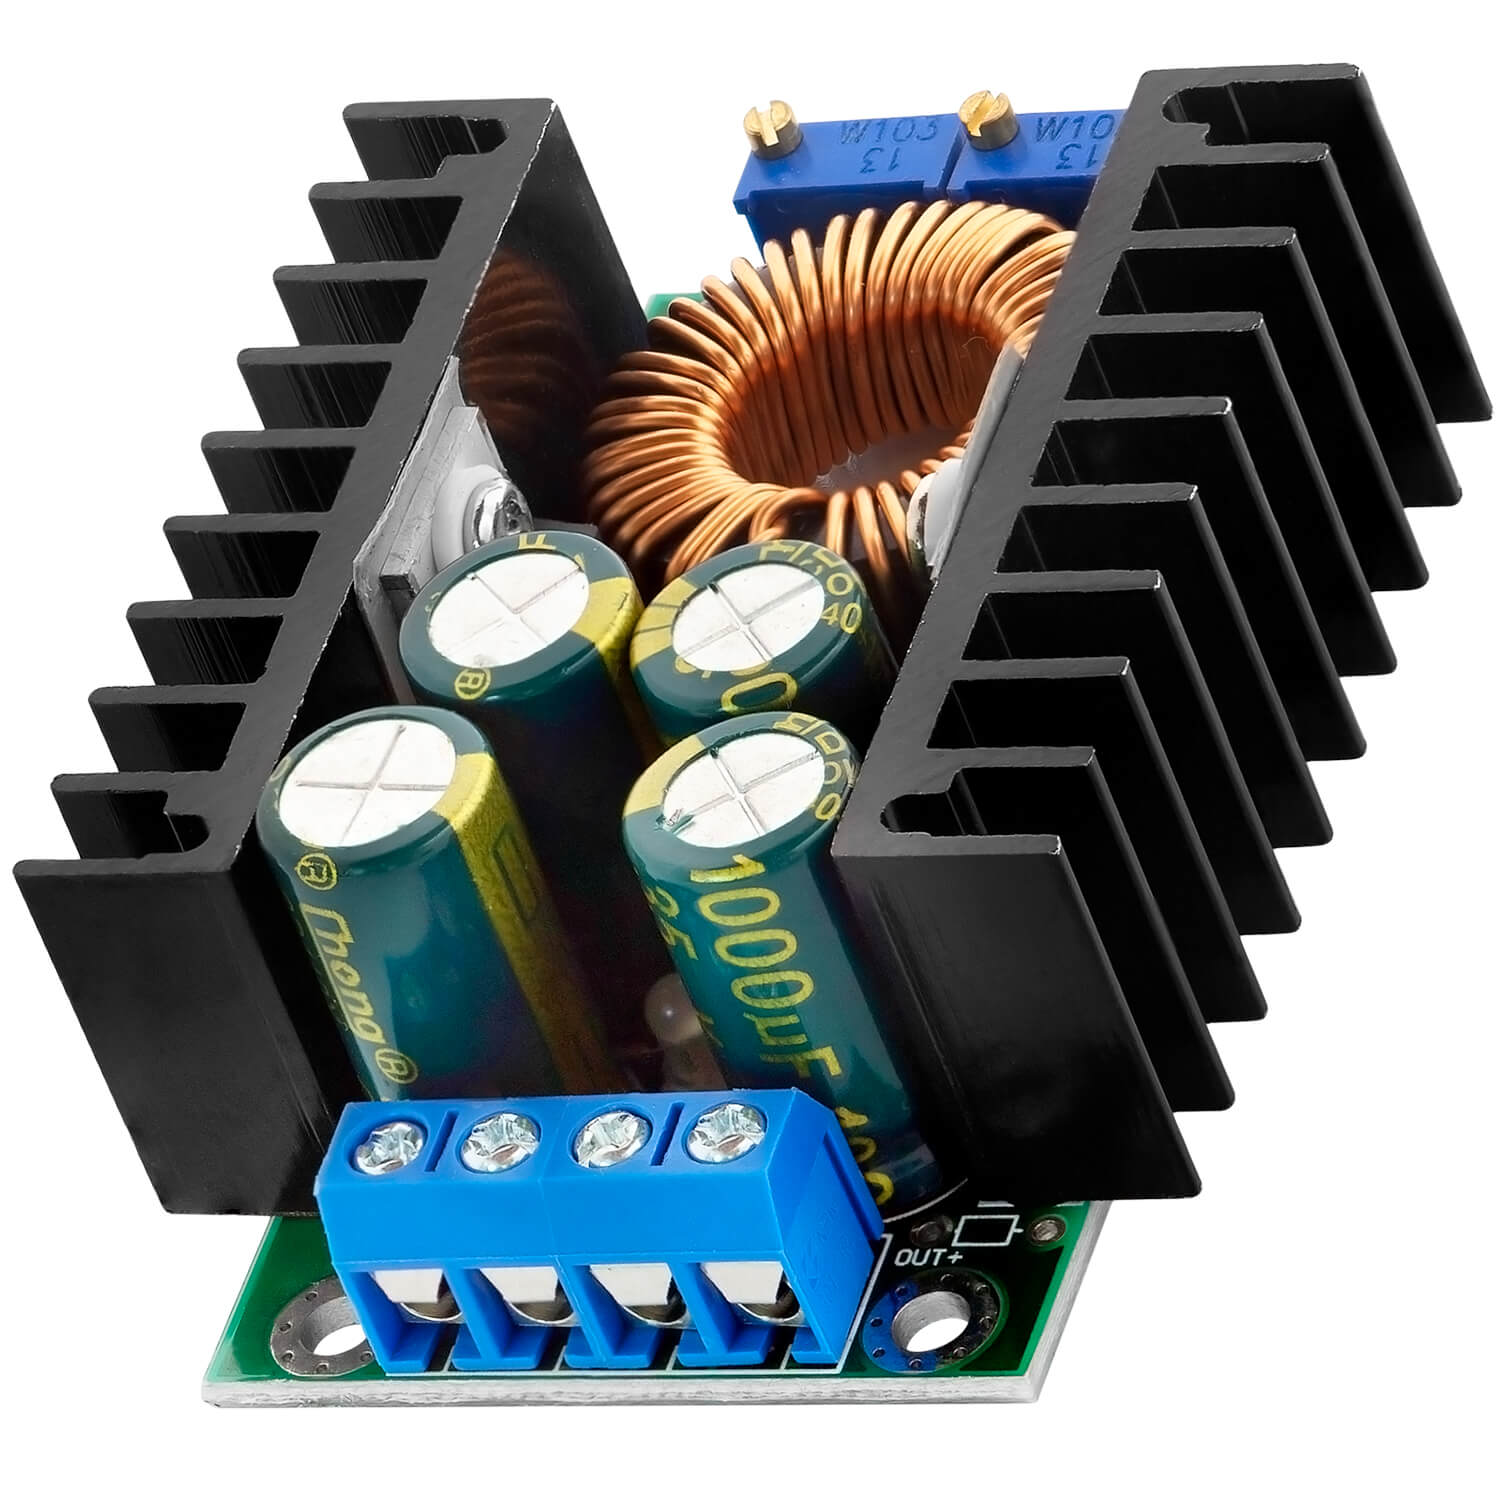 XL4016 Step-Down Buck Converter DC-DC compatible with Arduino